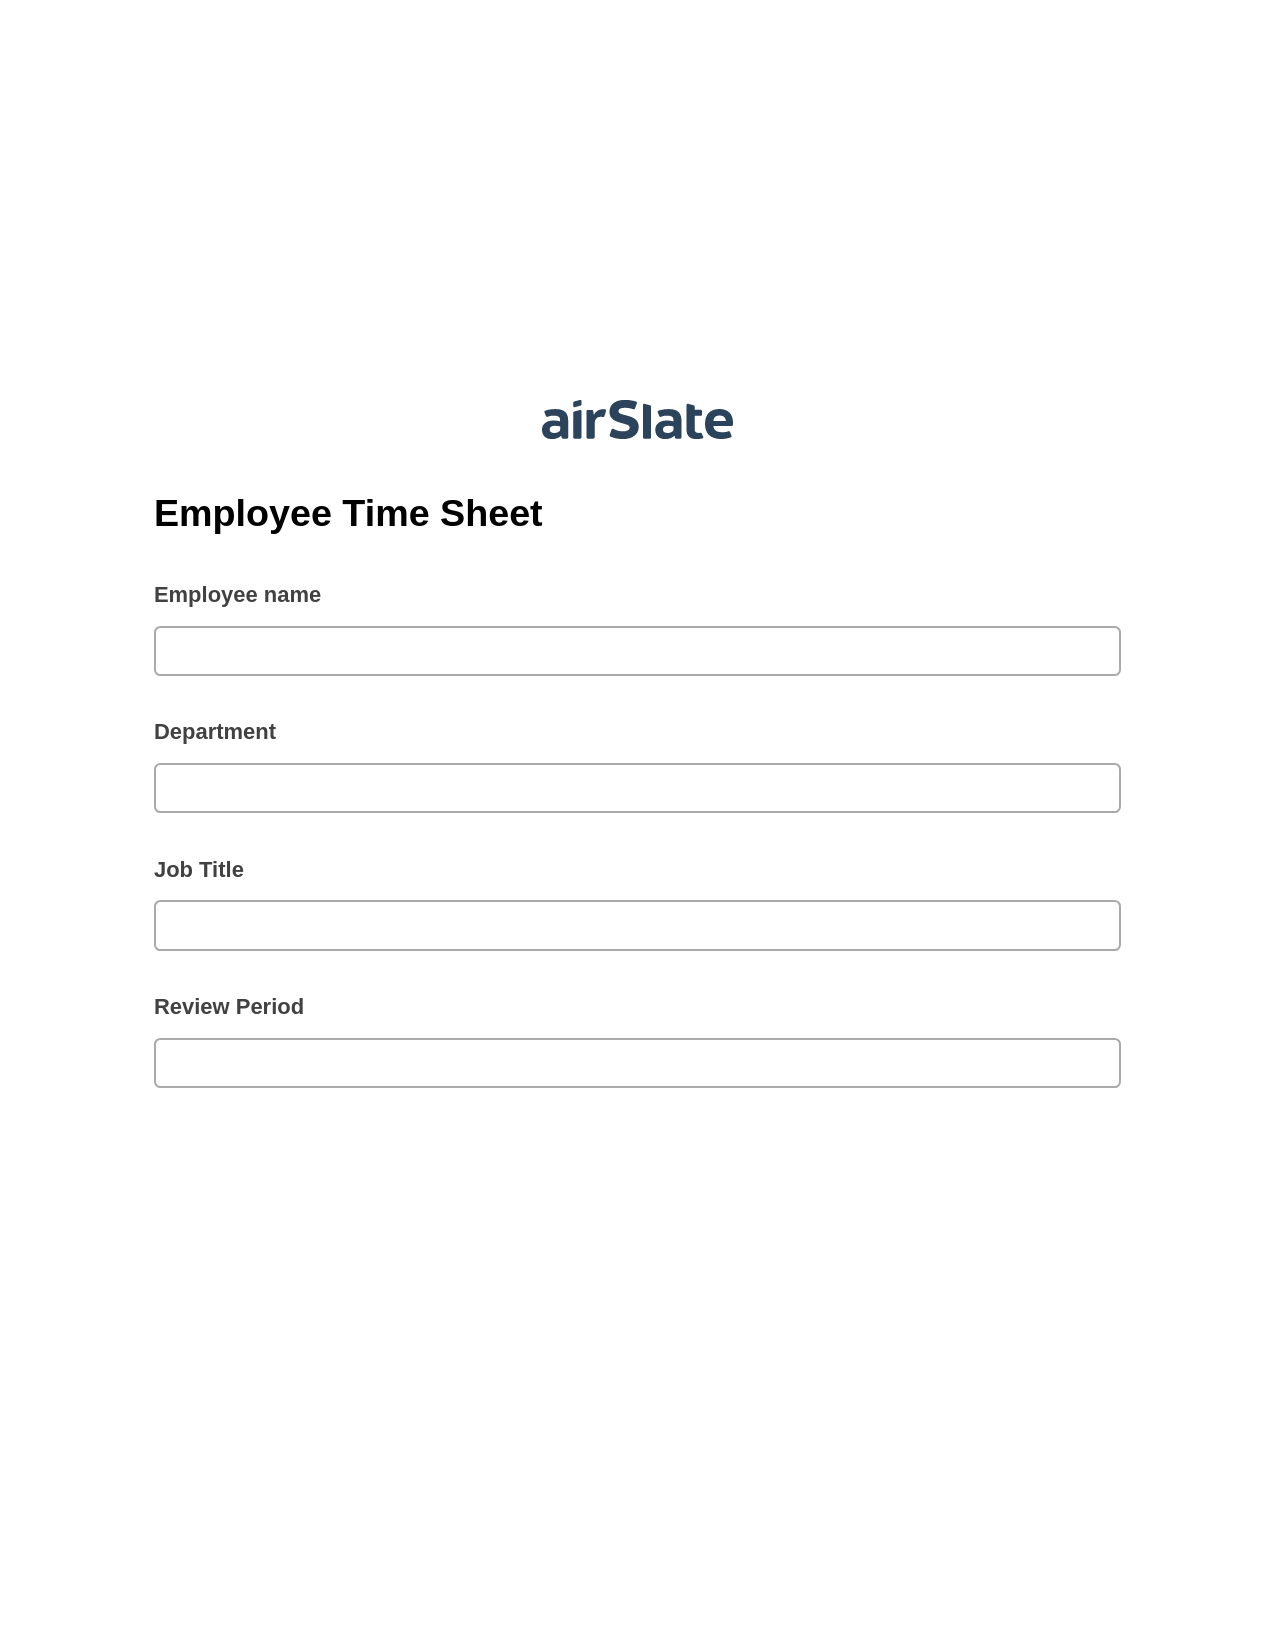 Multirole Employee Time Sheet Pre-fill from Google Sheets Bot, Create Salesforce Records Bot, Export to NetSuite Bot